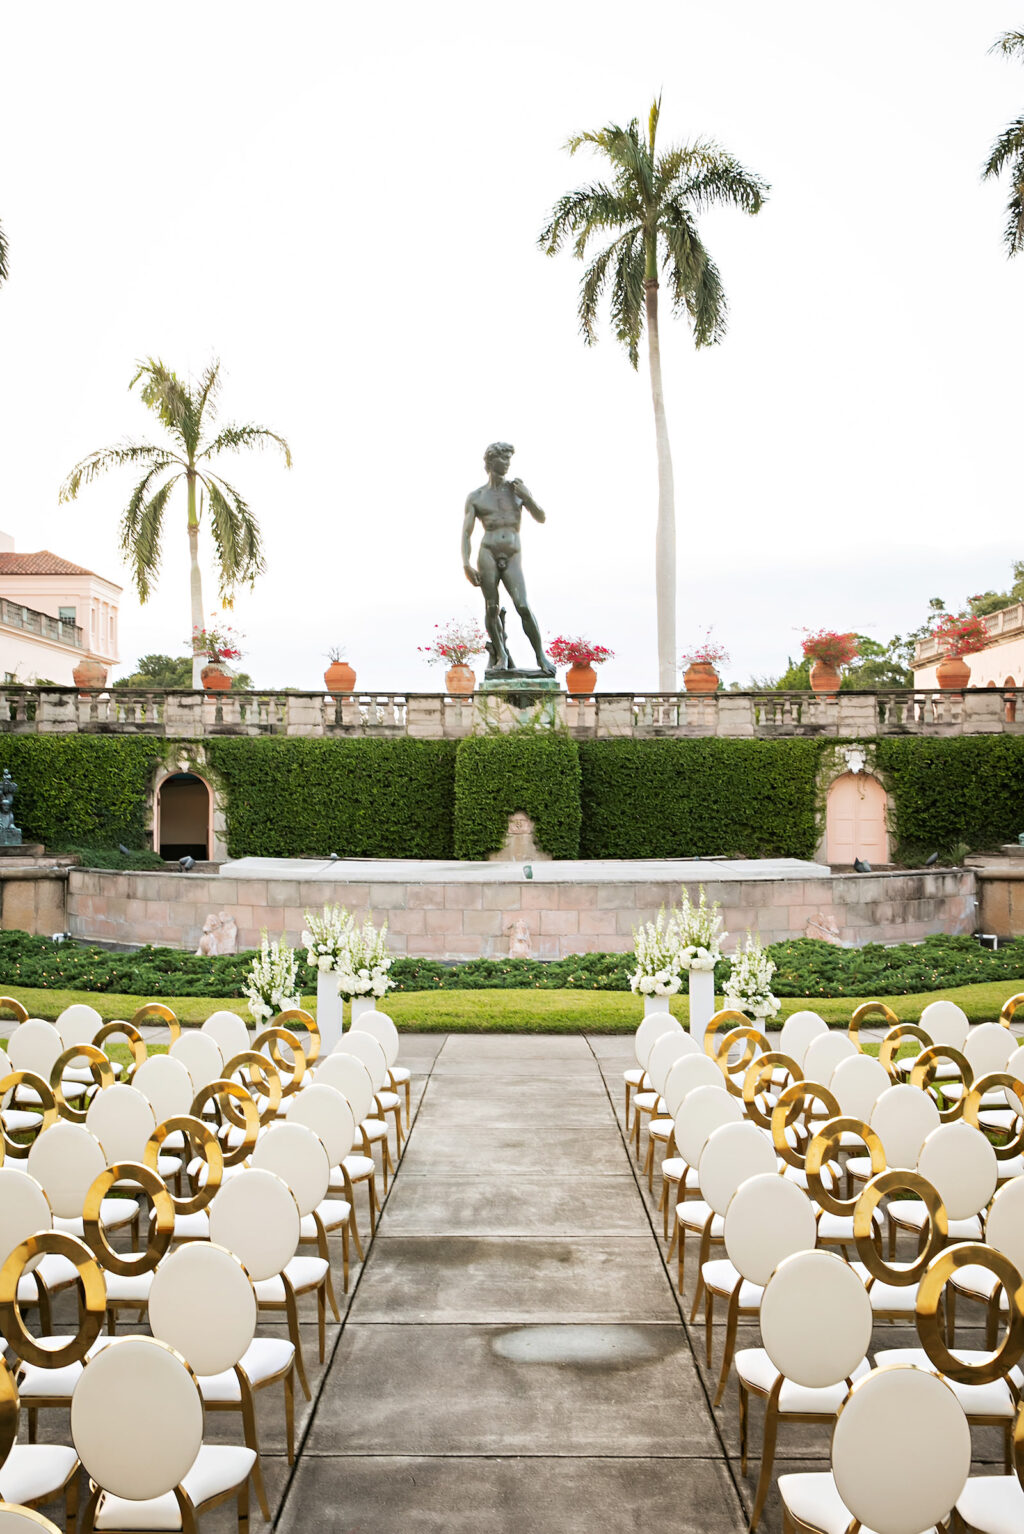 Luxurious Modern Outdoor Courtyard Wedding Ceremony Decor, White and Gold Wedding Chairs | Tampa Bay Wedding Photographer | Sarasota Wedding Venue Ringling Museum